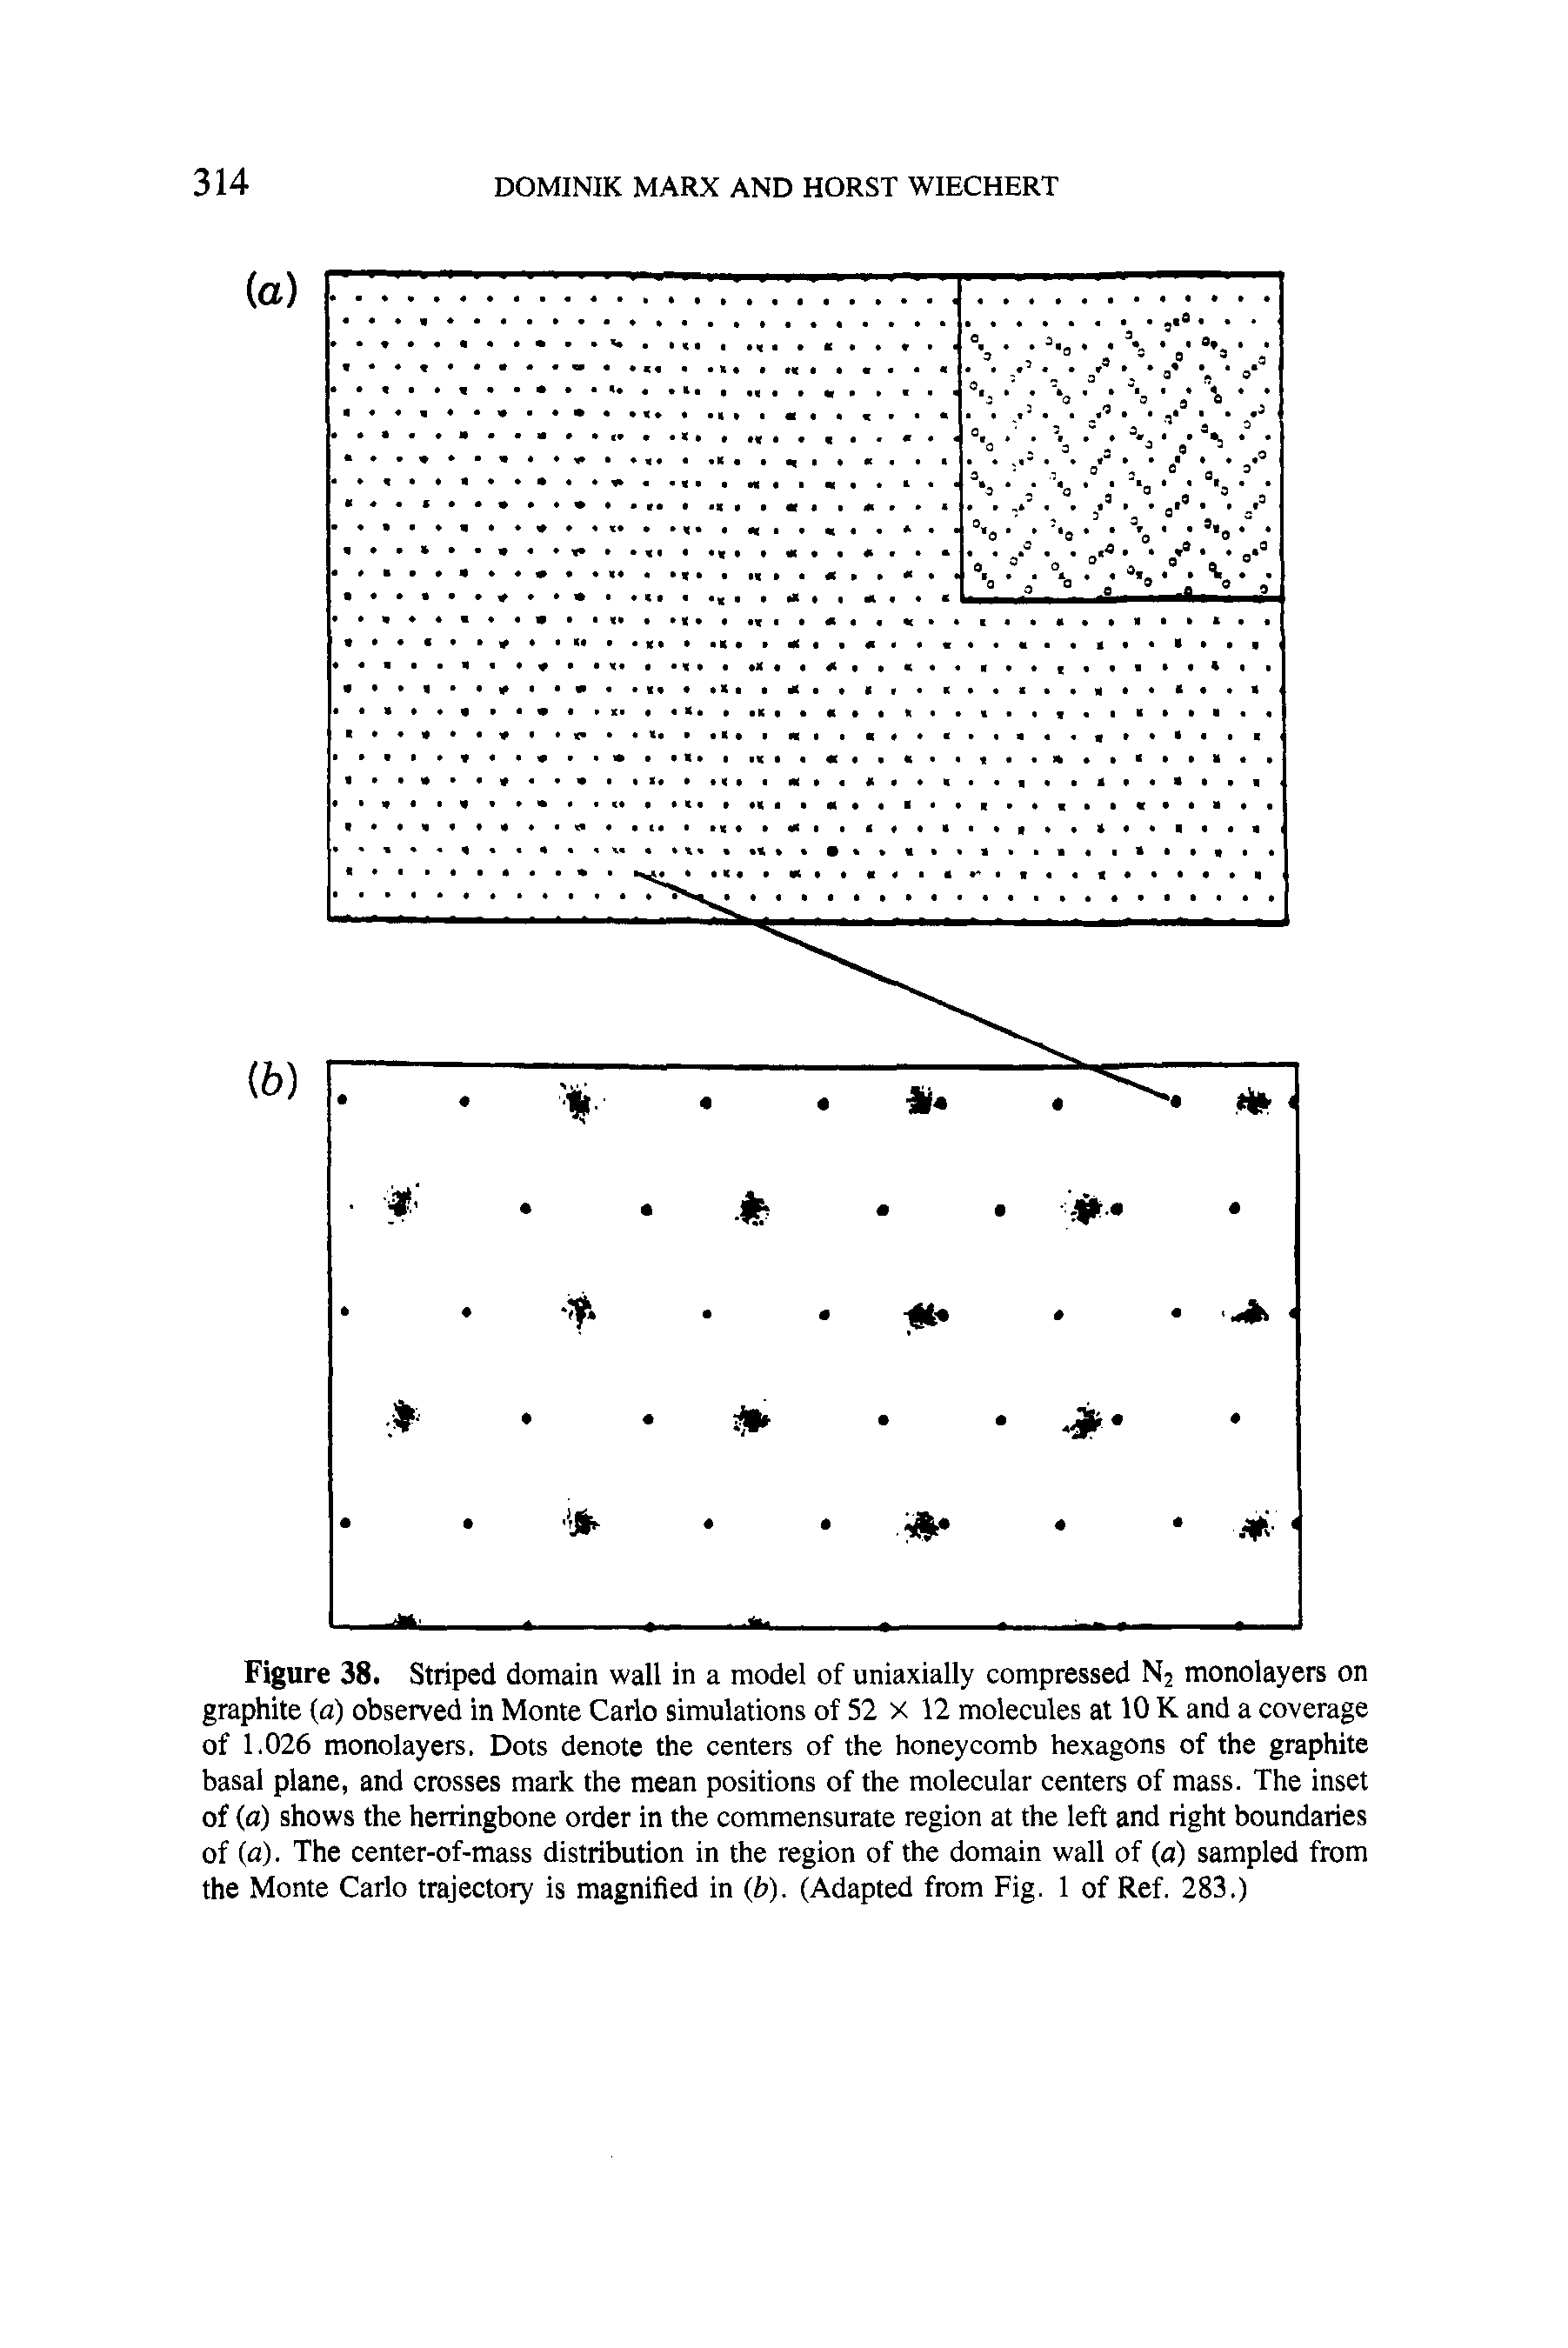 Figure 38. Striped domain wall in a model of uniaxially compressed N2 monolayers on graphite (a) observed in Monte Carlo simulations of 52 X 12 molecules at 10 K and a coverage of 1.026 monolayers. Dots denote the centers of the honeycomb hexagons of the graphite basal plane, and crosses mark the mean positions of the molecular centers of mass. The inset of (a) shows the herringbone order in the commensurate region at the left and right boundaries of (a). The center-of-mass distribution in the region of the domain wall of (a) sampled from the Monte Carlo trajectory is magnified in (b). (Adapted from Fig. 1 of Ref. 283.)...